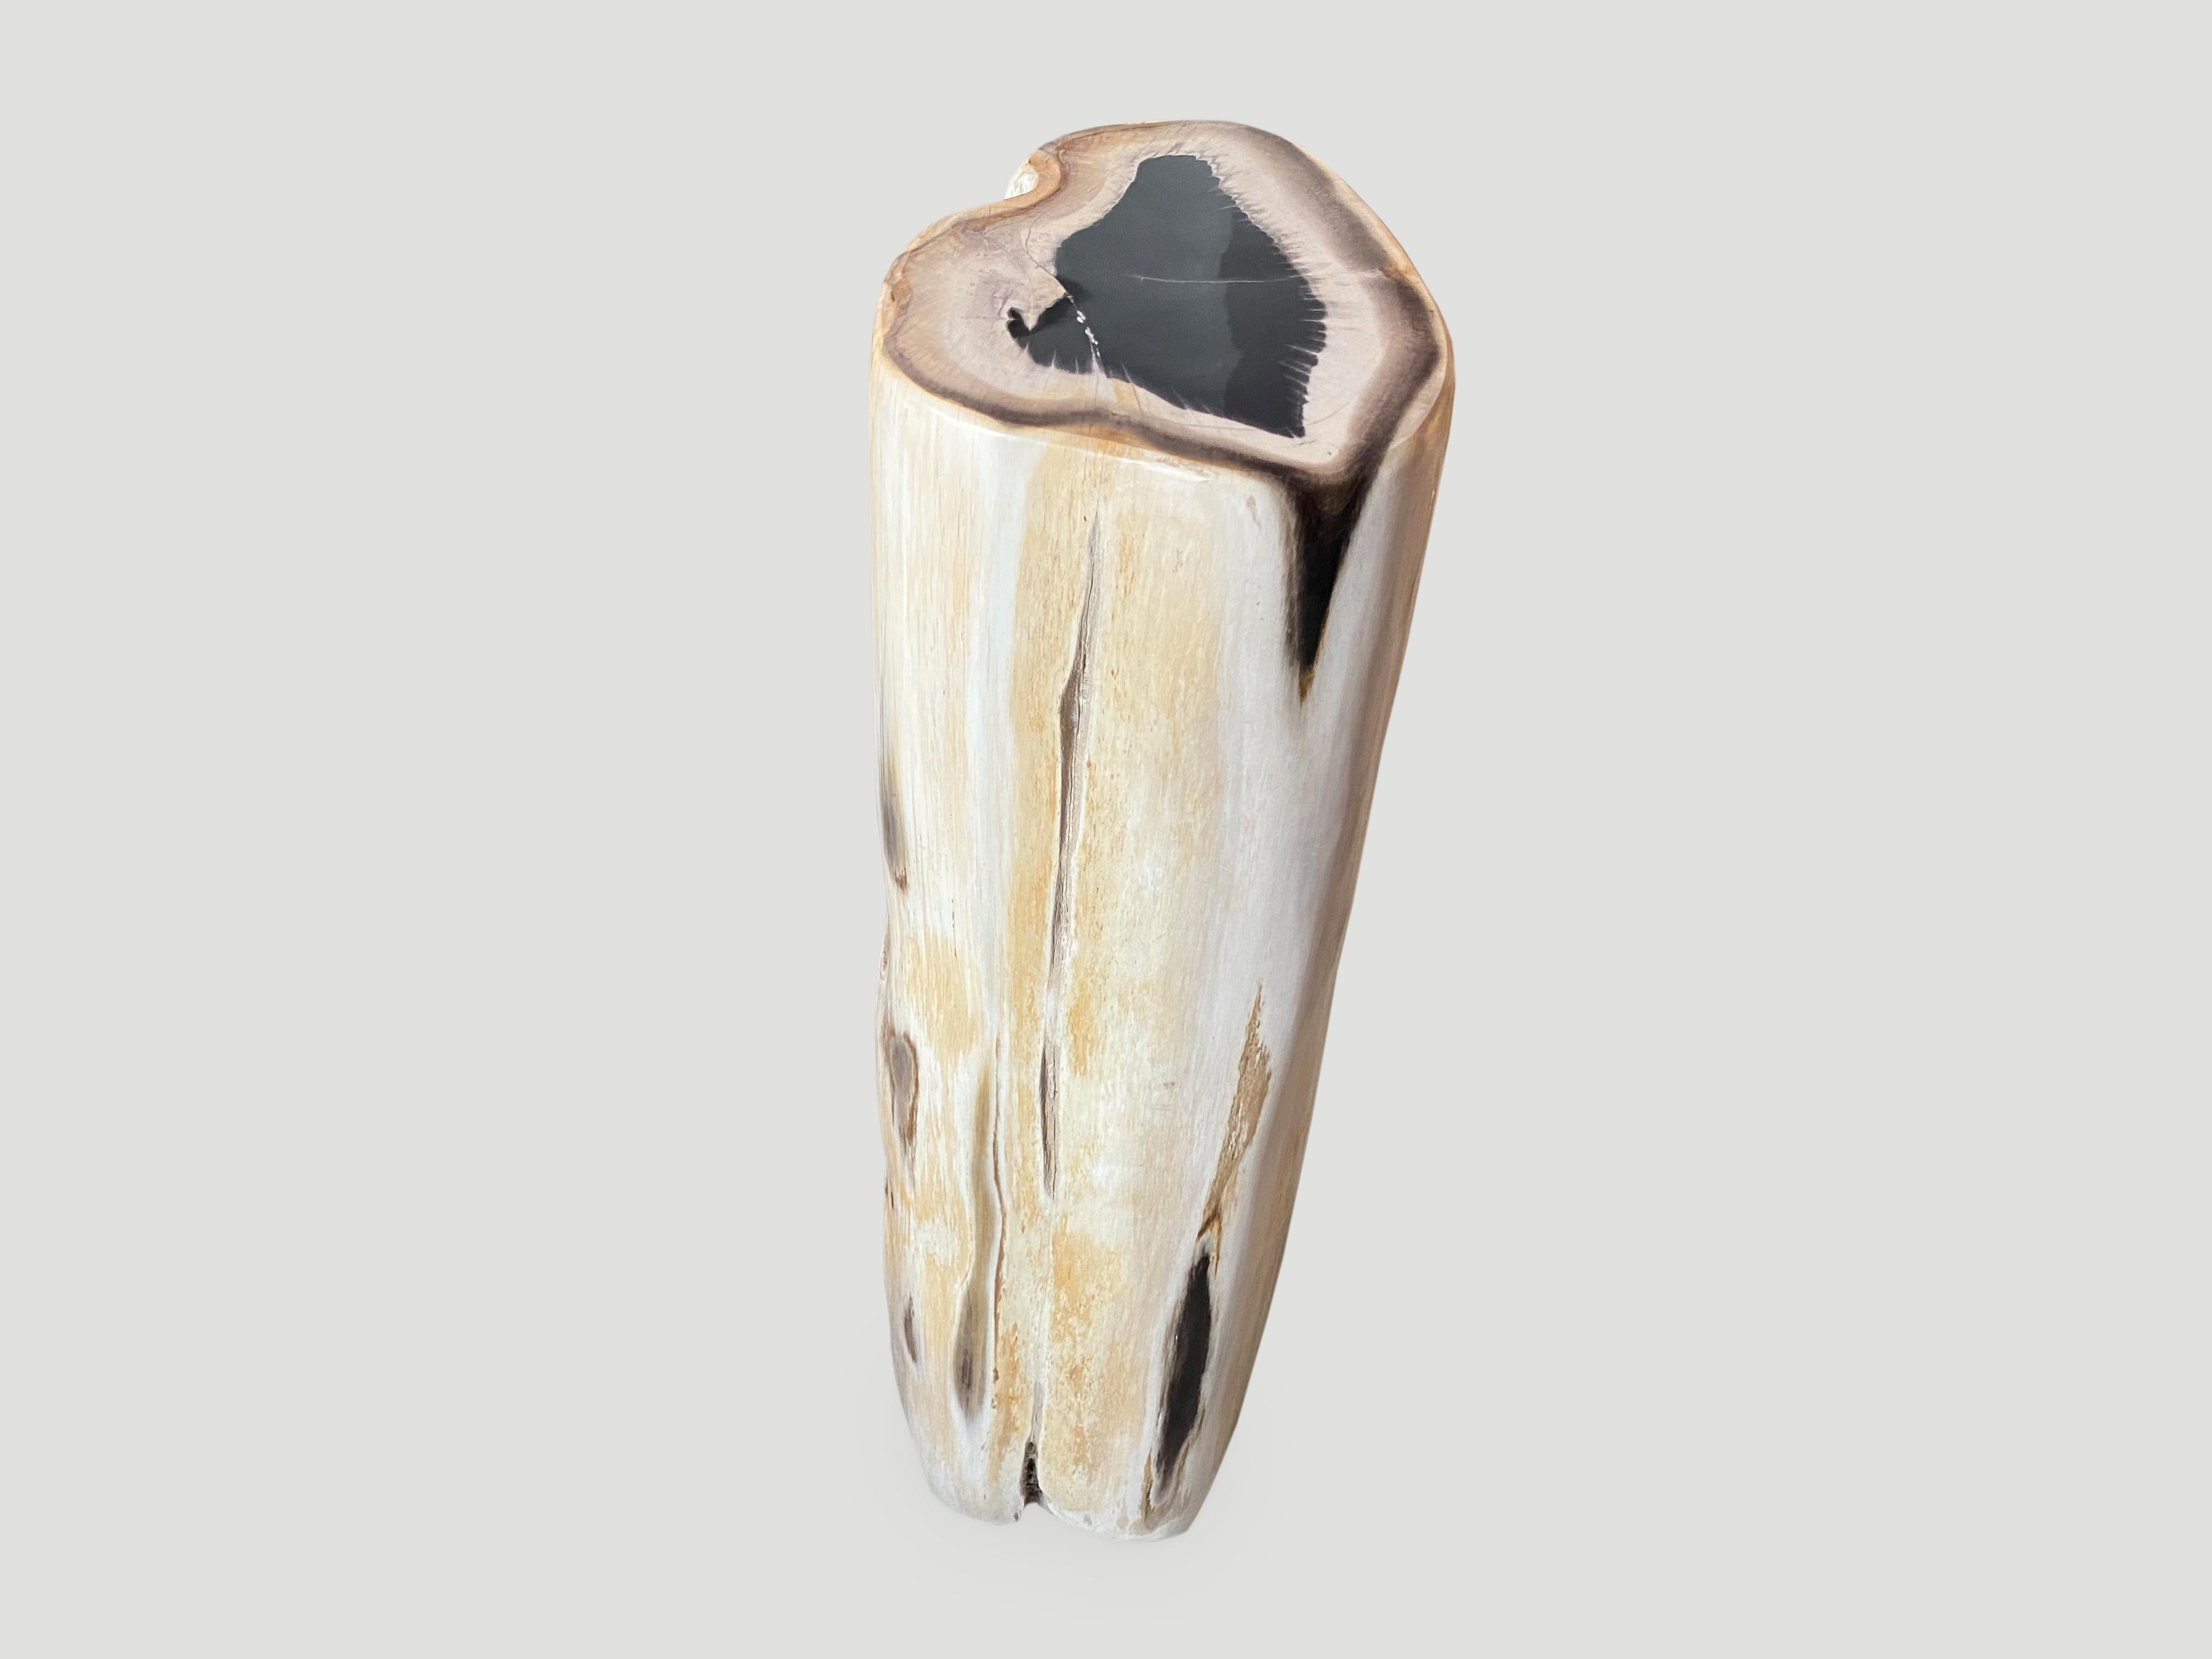 Exquisite, super smooth, rare petrified wood pedestal or side table. We have a collection of three cut from the same log with stunning contrasting tones. The price, images and size represents the one shown.

As with a diamond, we polish the